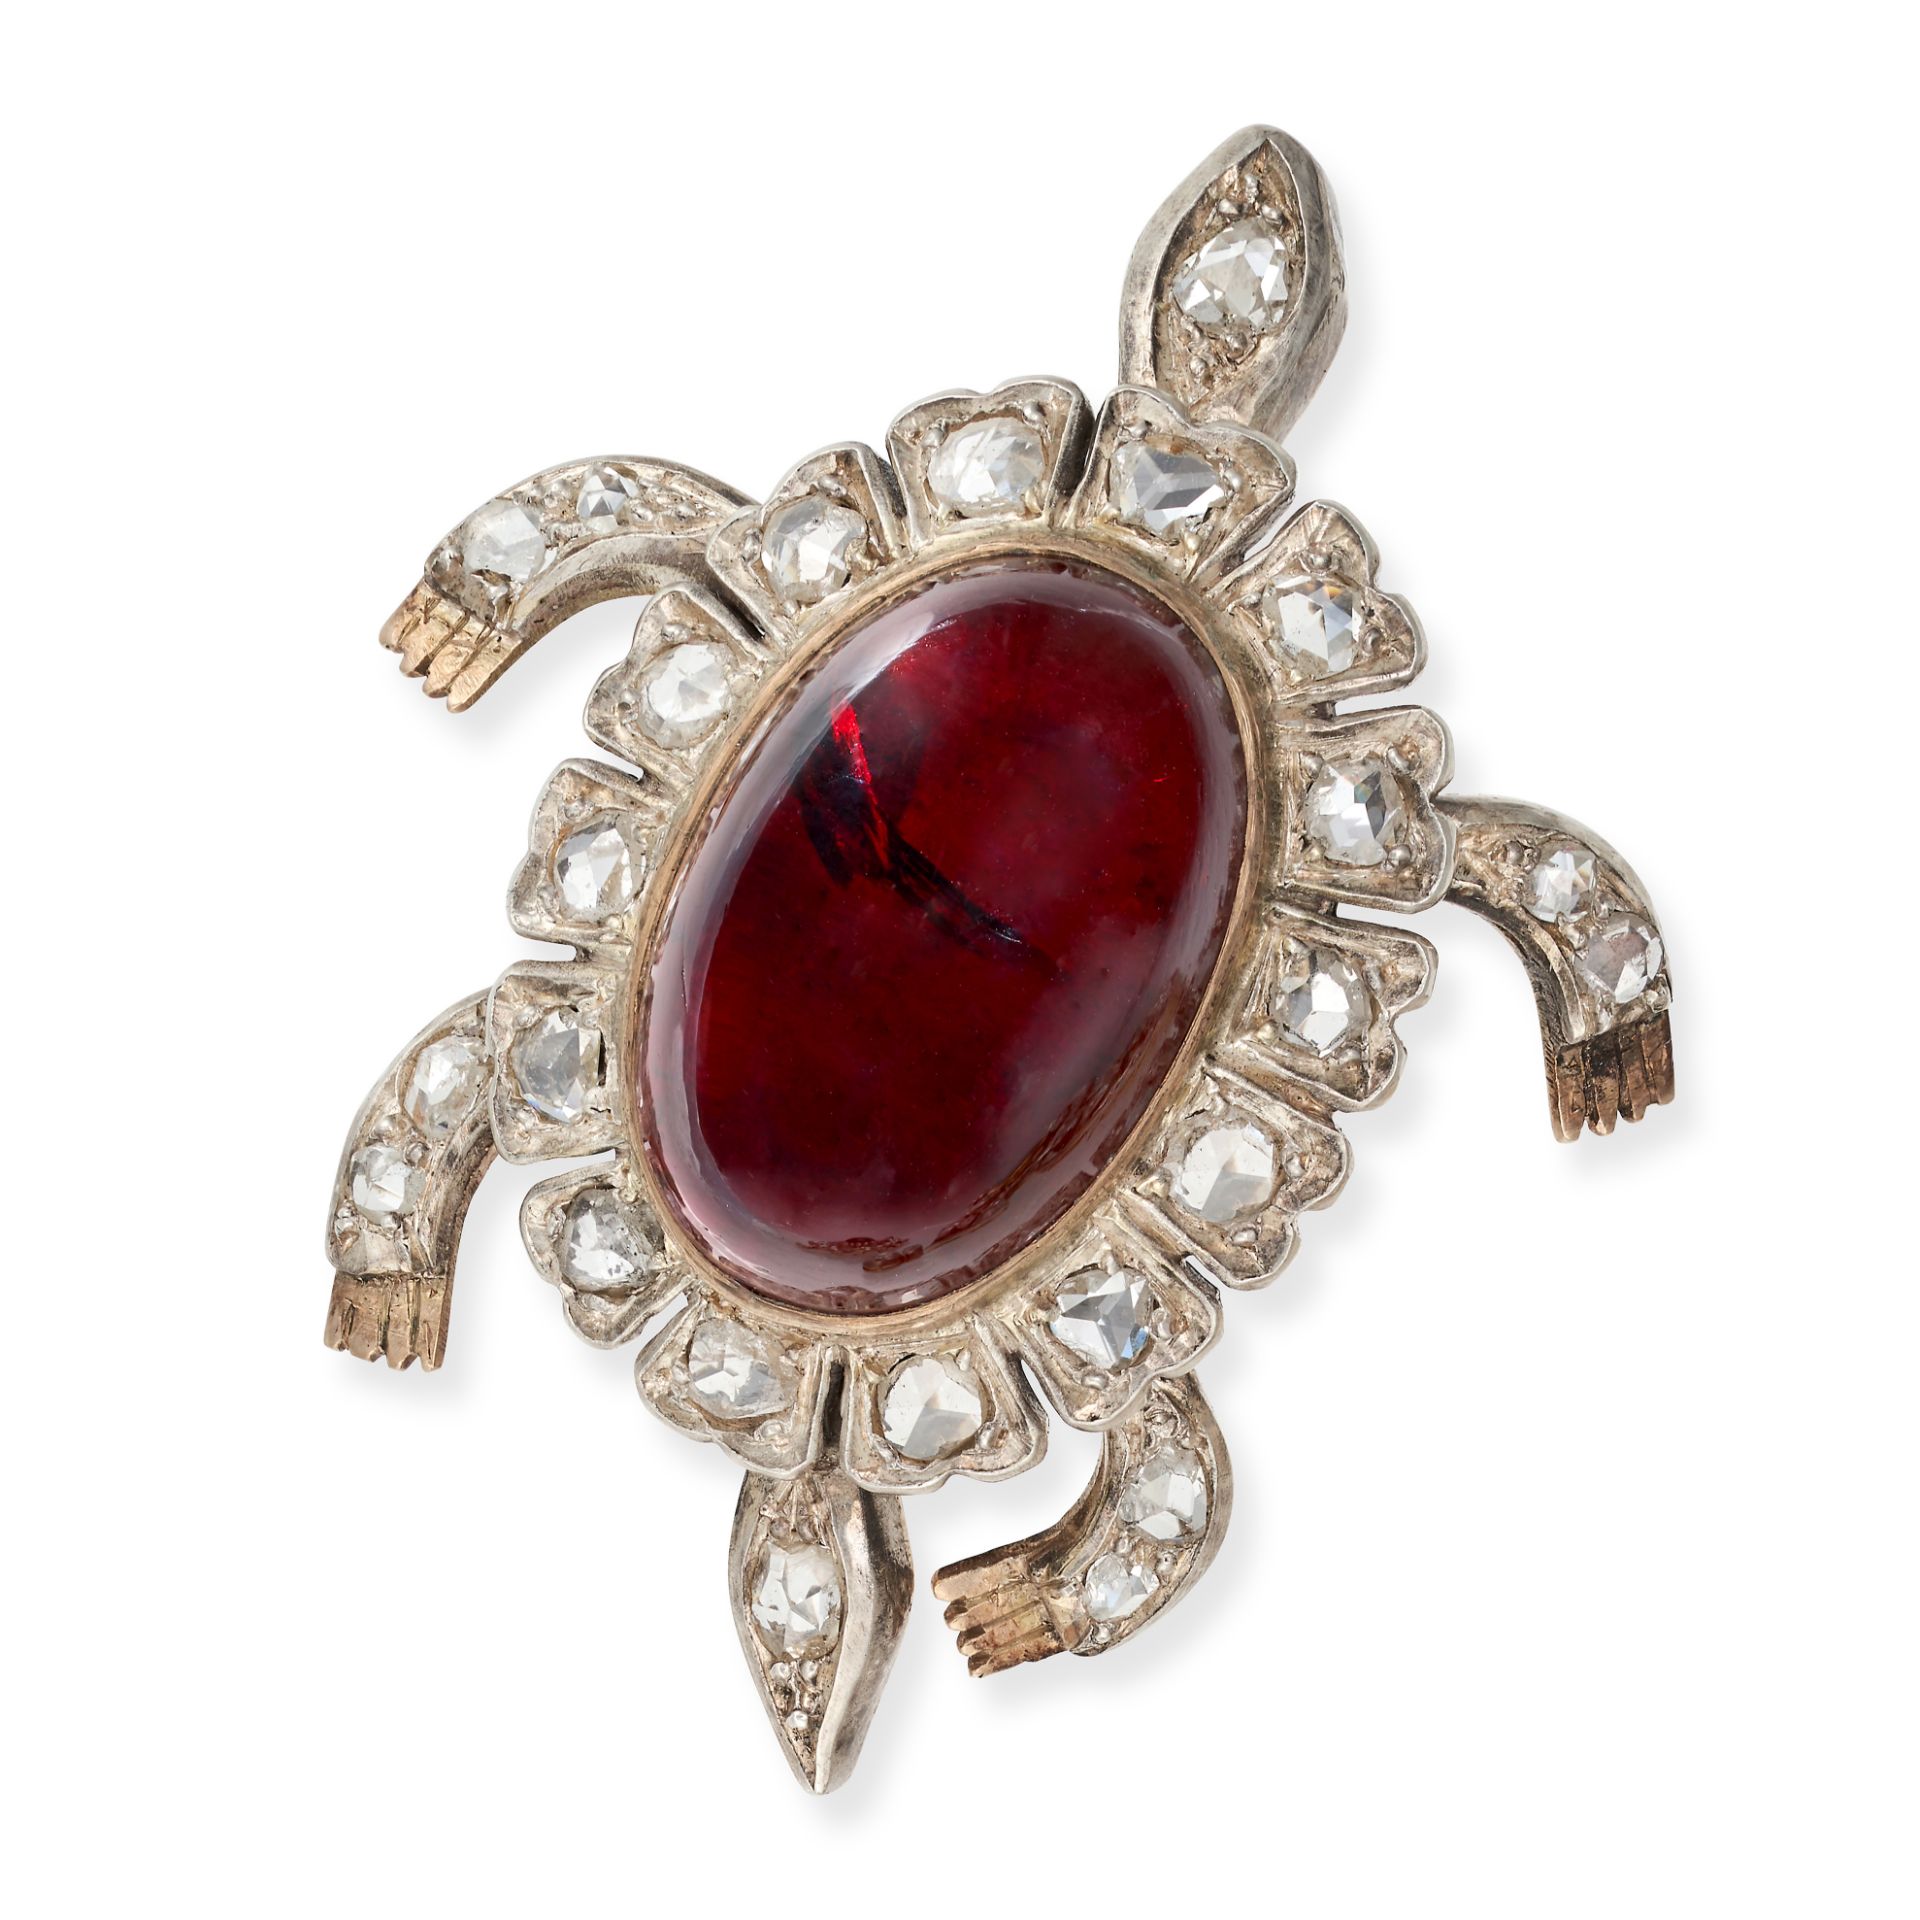 A GARNET AND DIAMOND TURTLE BROOCH in yellow gold and silver, the shell set with a cabochon garne...